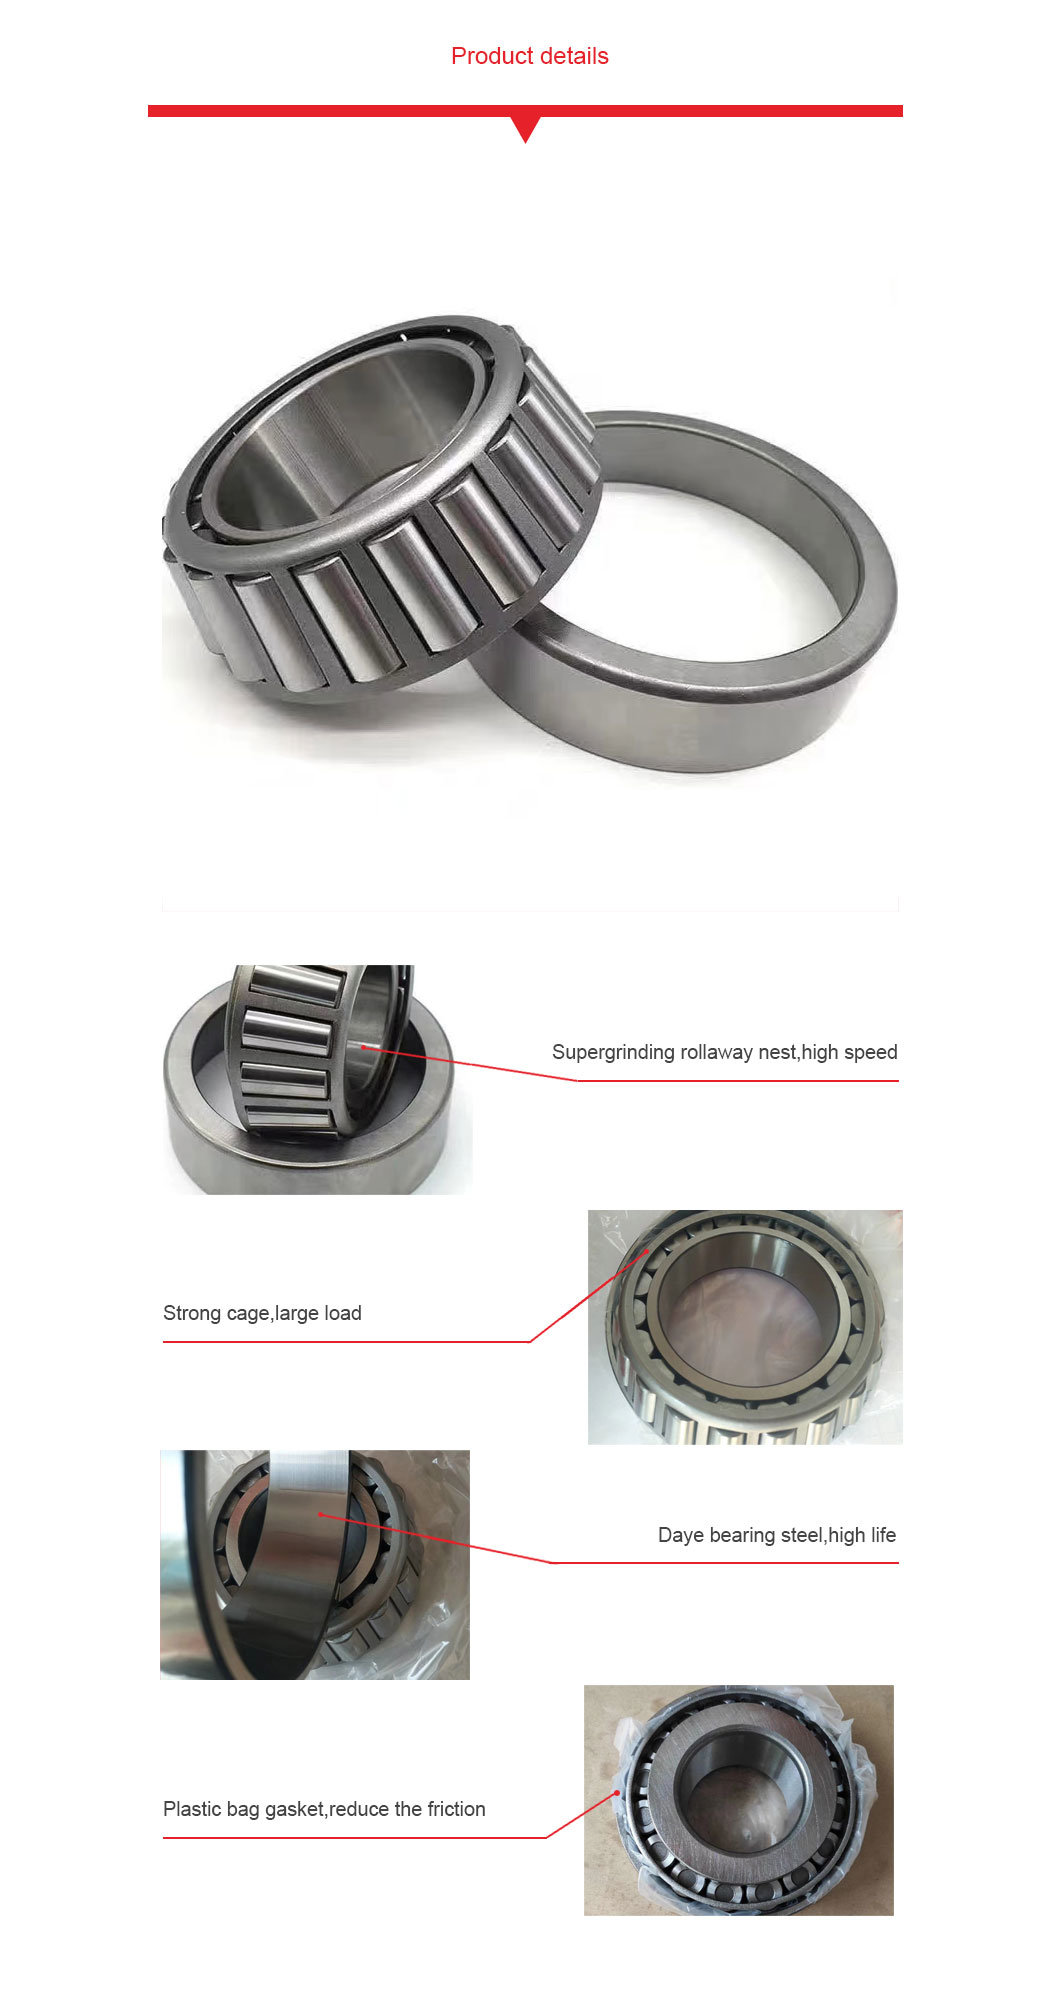 High Precision Single Row Tapered Roller Bearing, Original Chrome Steel Inch Tapered Roller Bearing